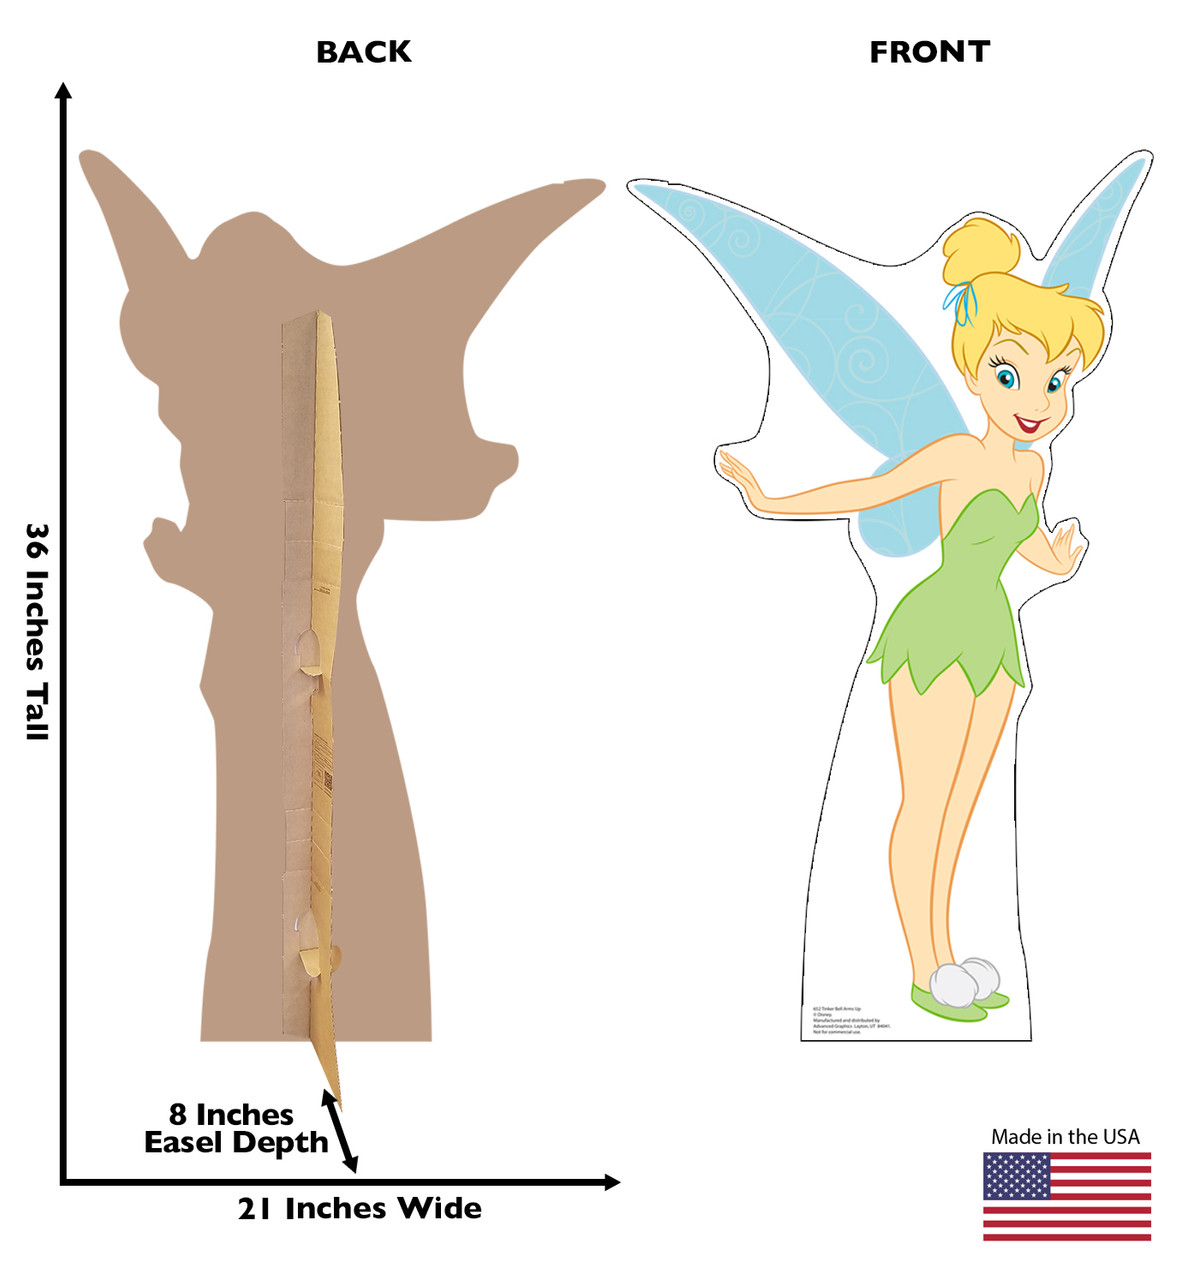 Life-size cardboard standee of Tinker Bell Arms Up with back and front dimensions.